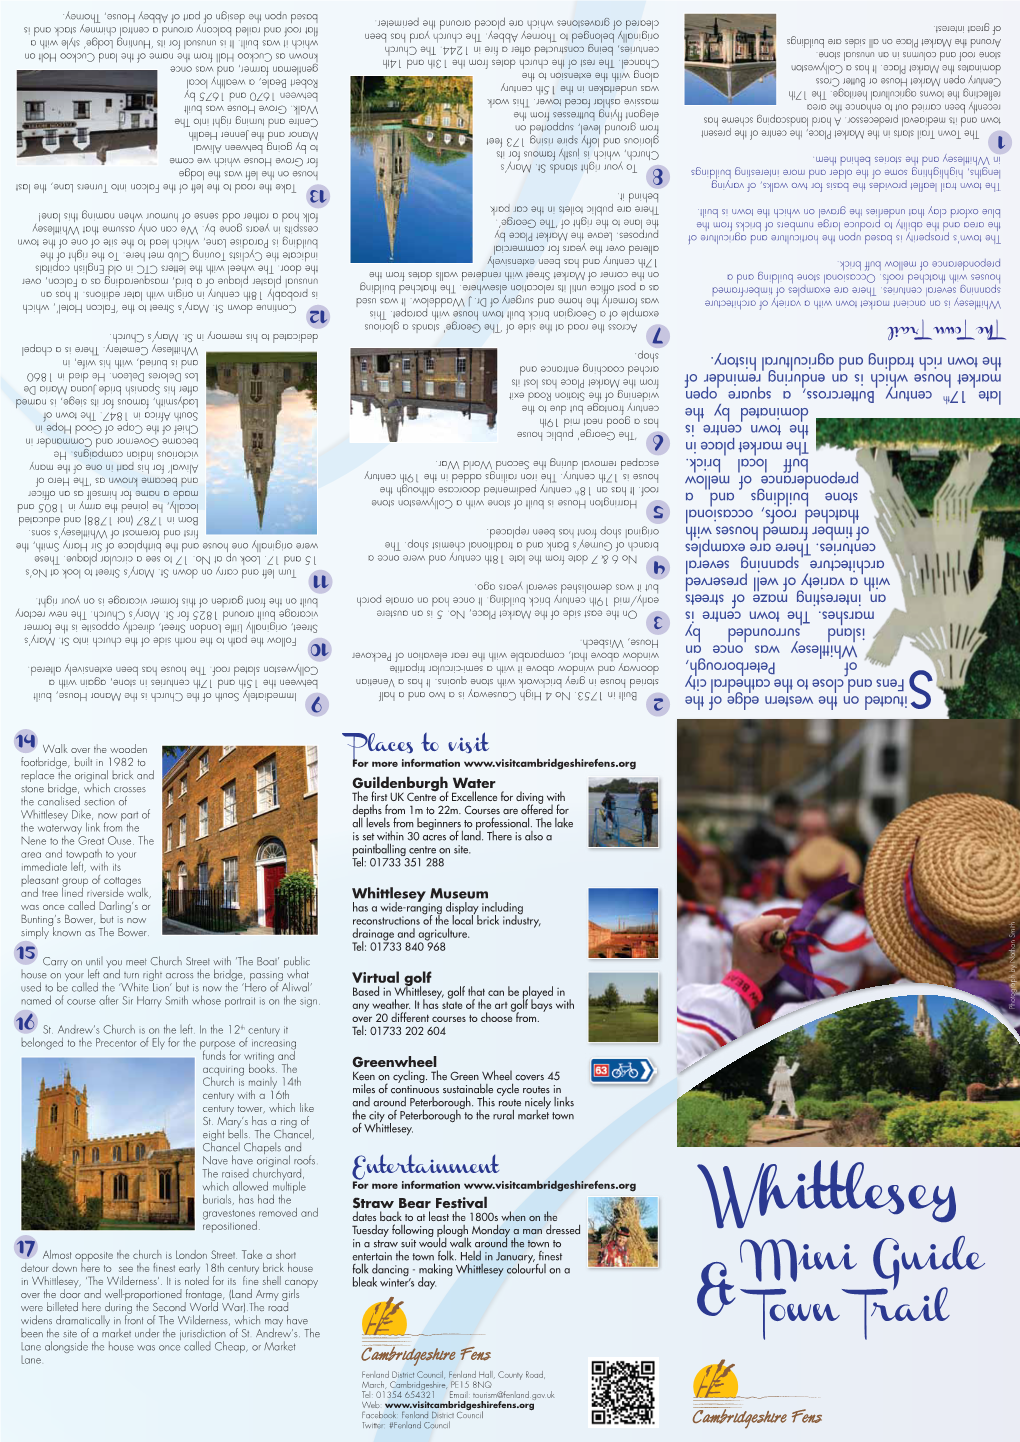 Whittlesey Mini Guide